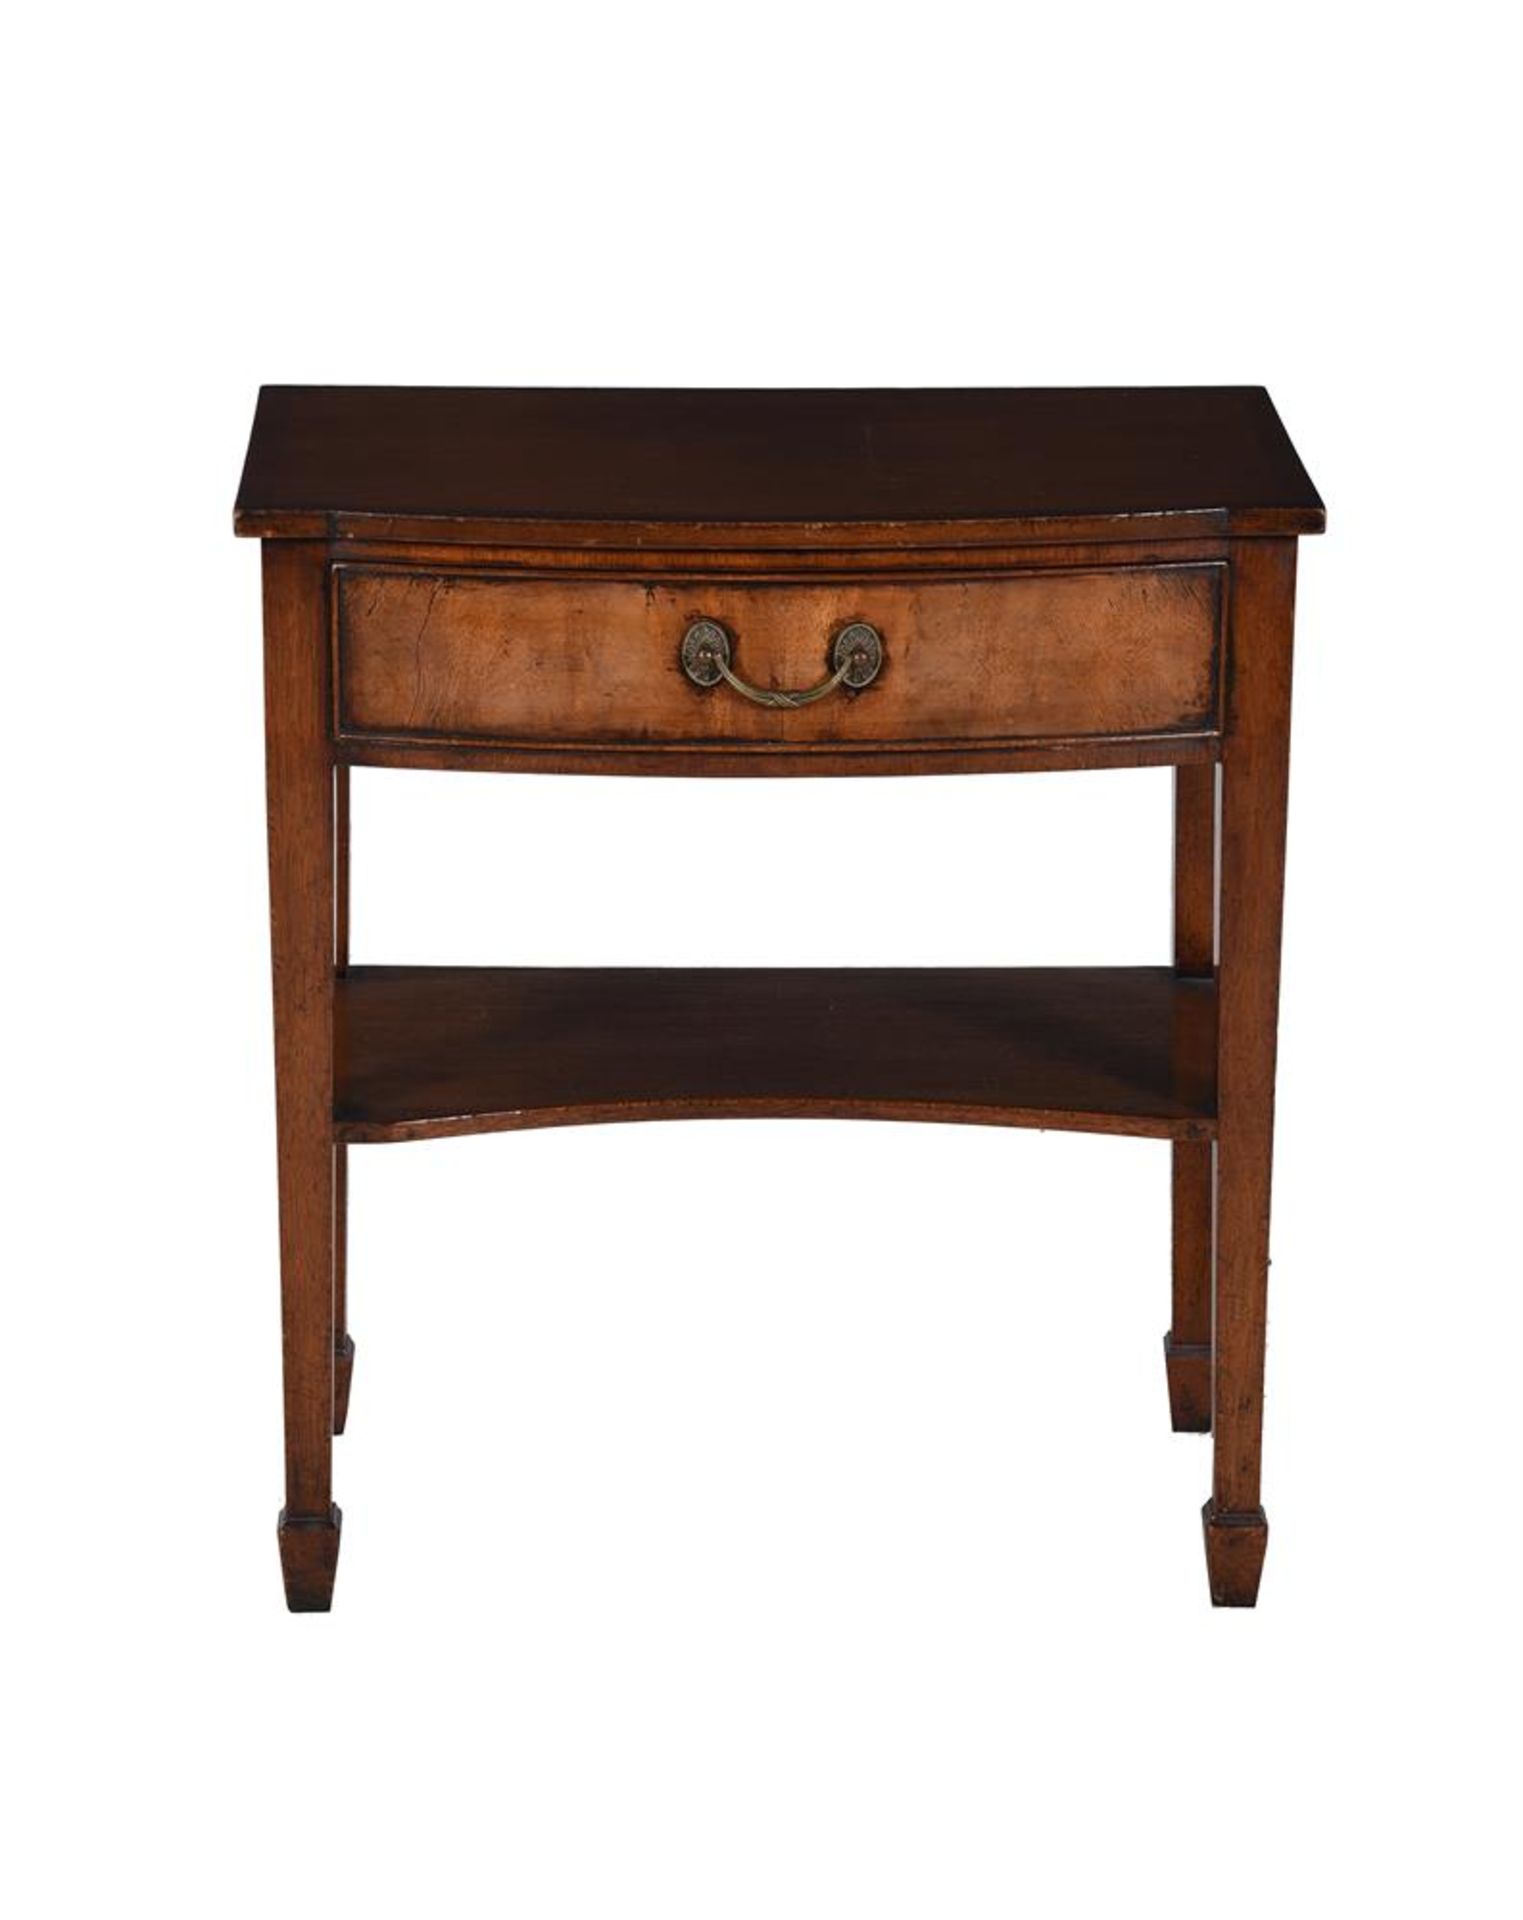 AN EARLY 20TH CENTURY SIDE TABLE IN GEORGE III STYLE